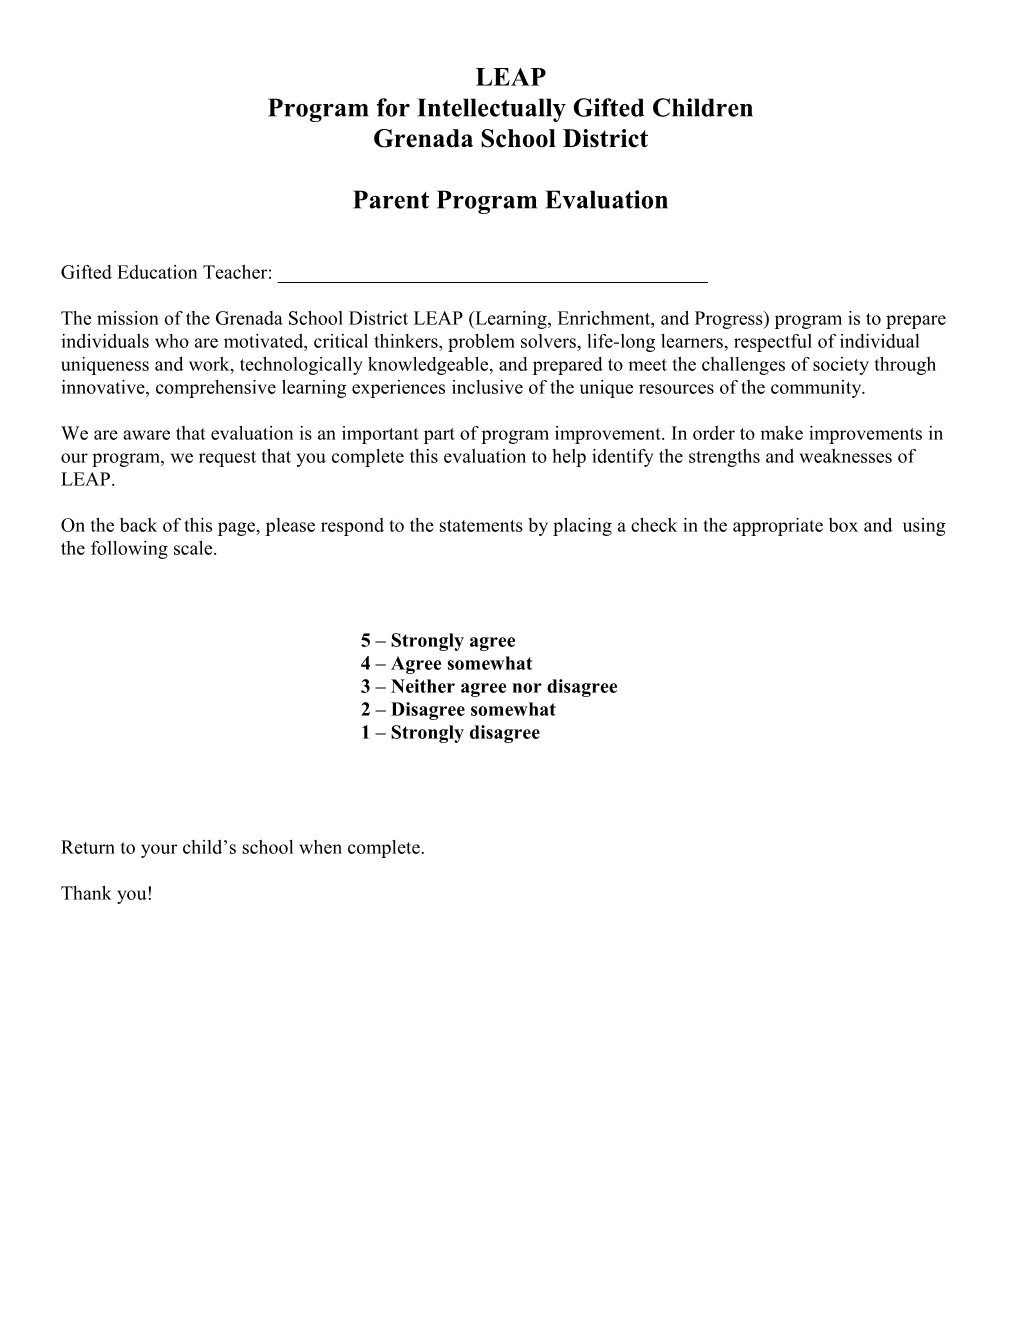 Parent Survey for Gifted Students